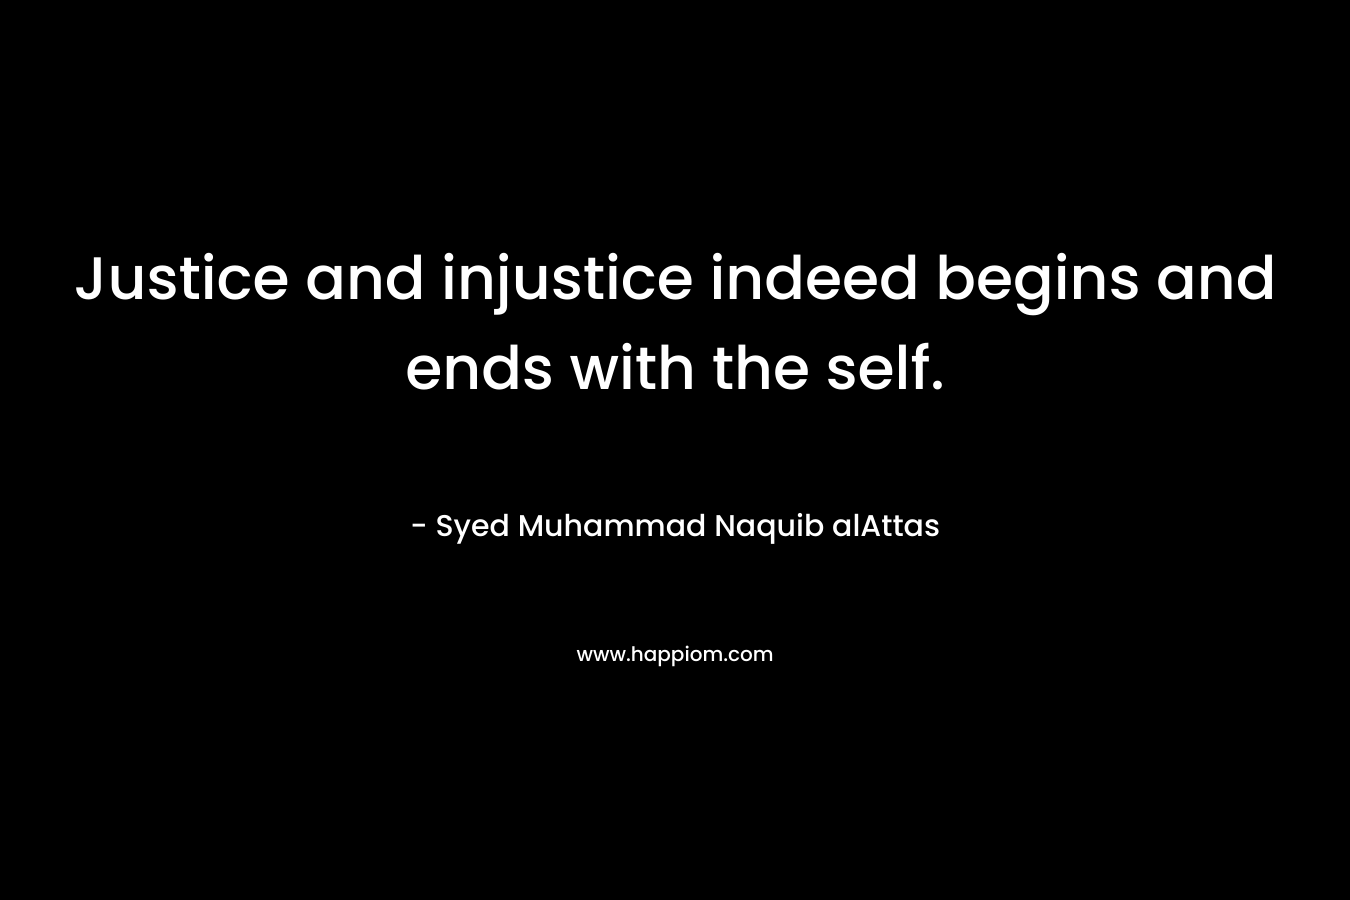 Justice and injustice indeed begins and ends with the self. – Syed Muhammad Naquib alAttas